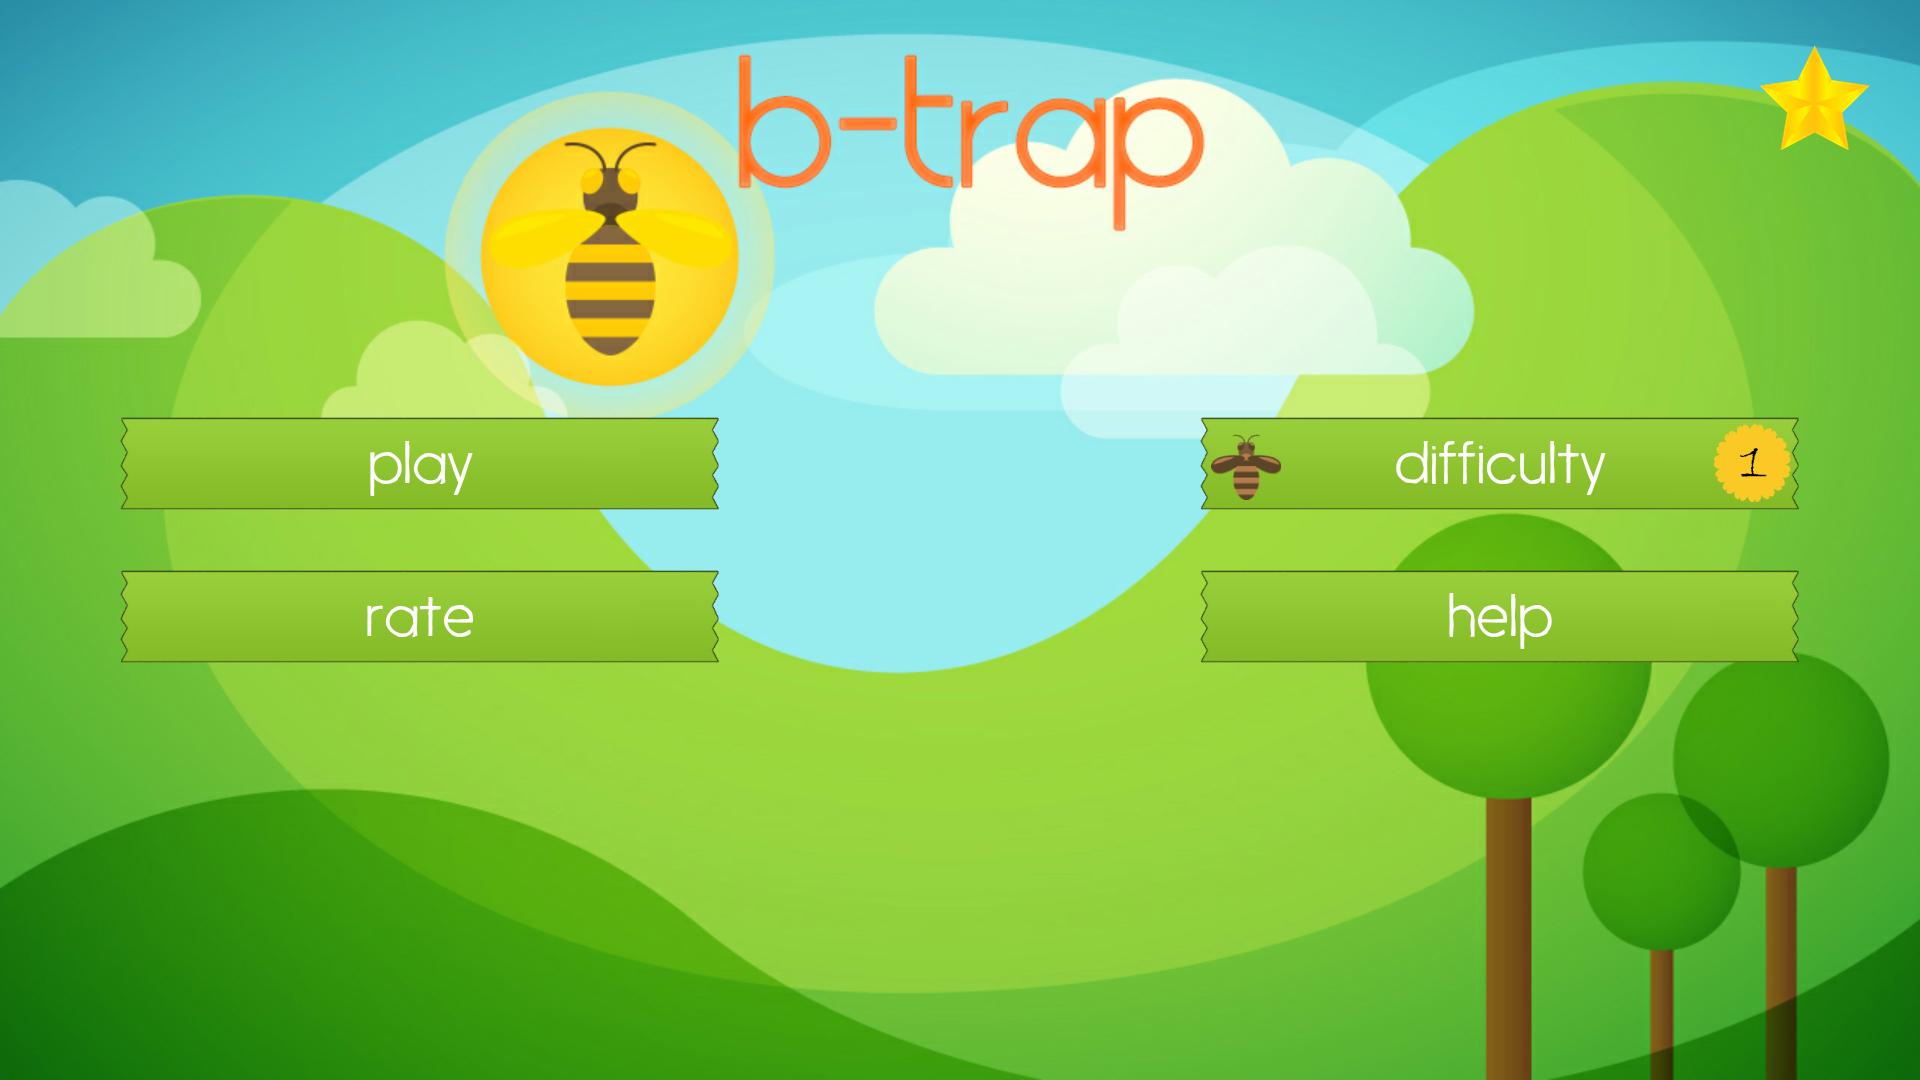 Trap android games. Bee Trap. Гугл треп.